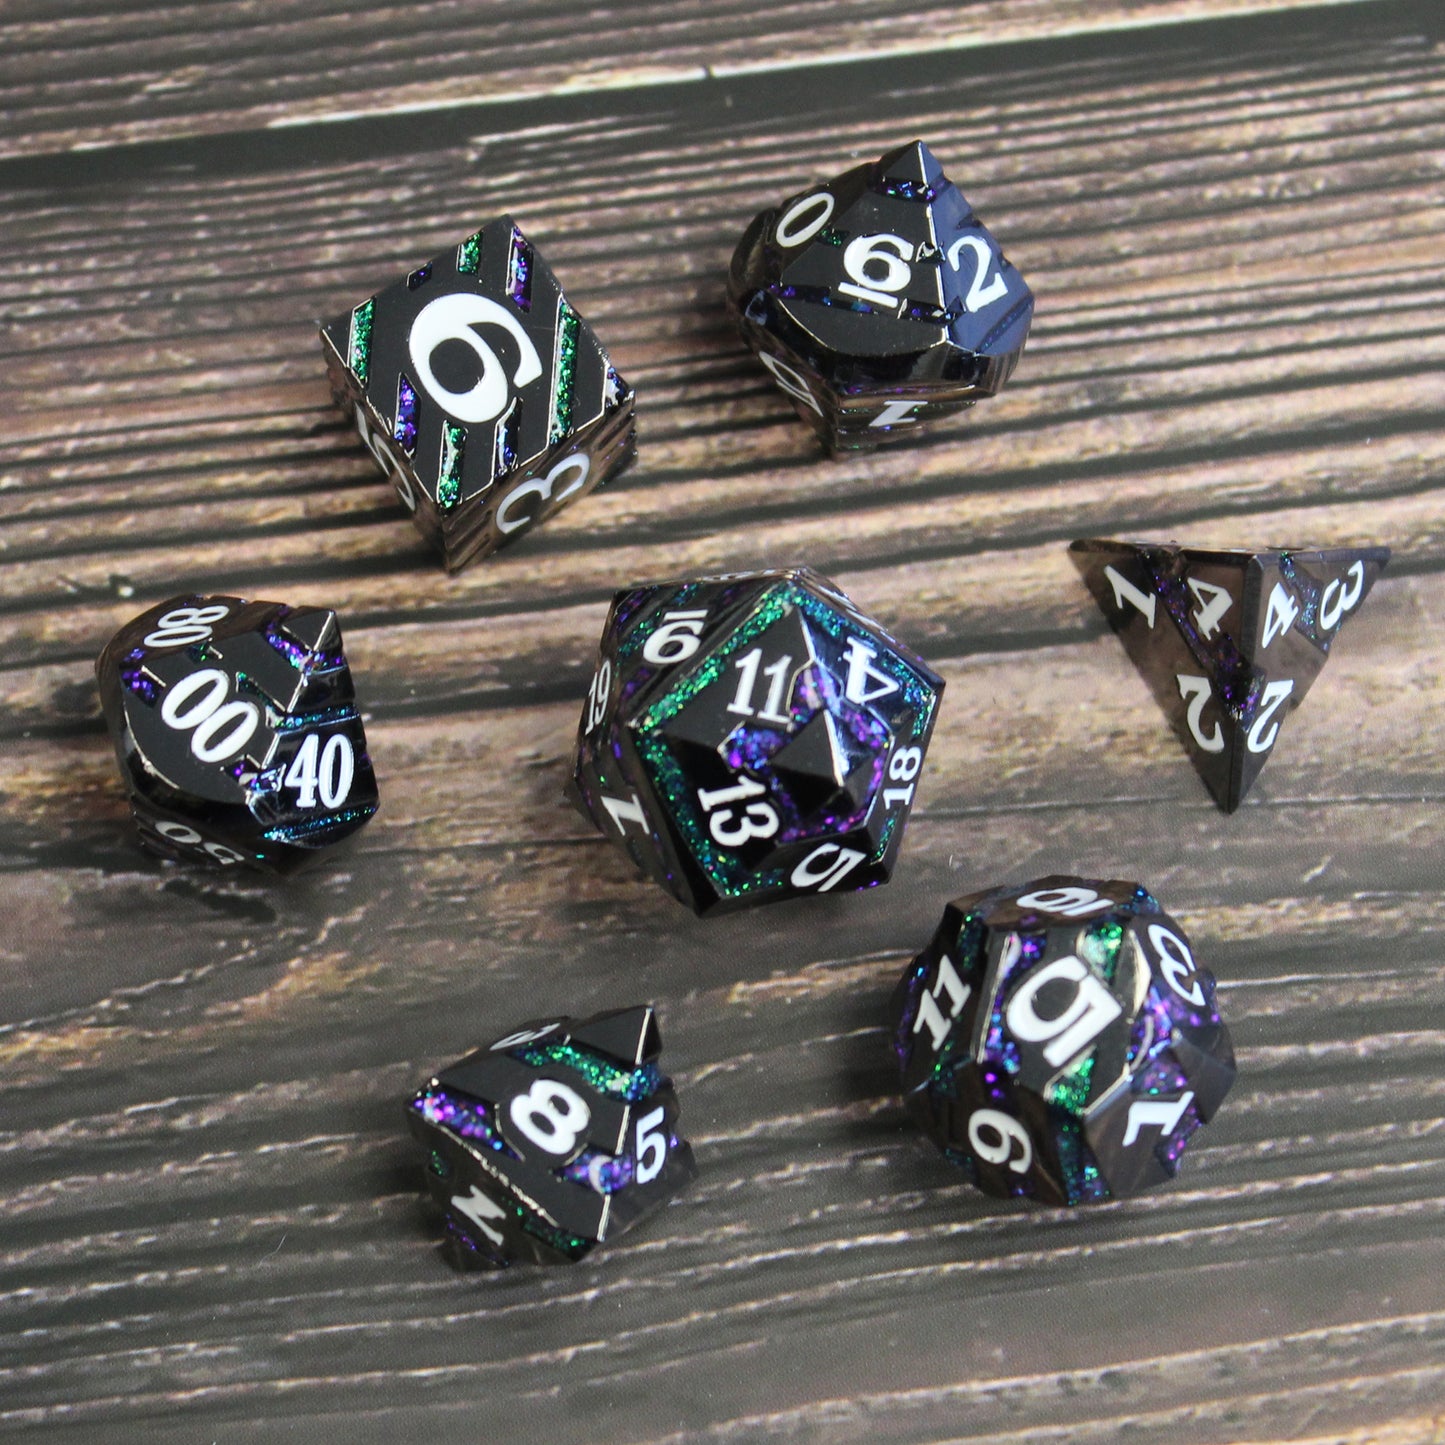 7 piece metla dice set for dungeons and dragons